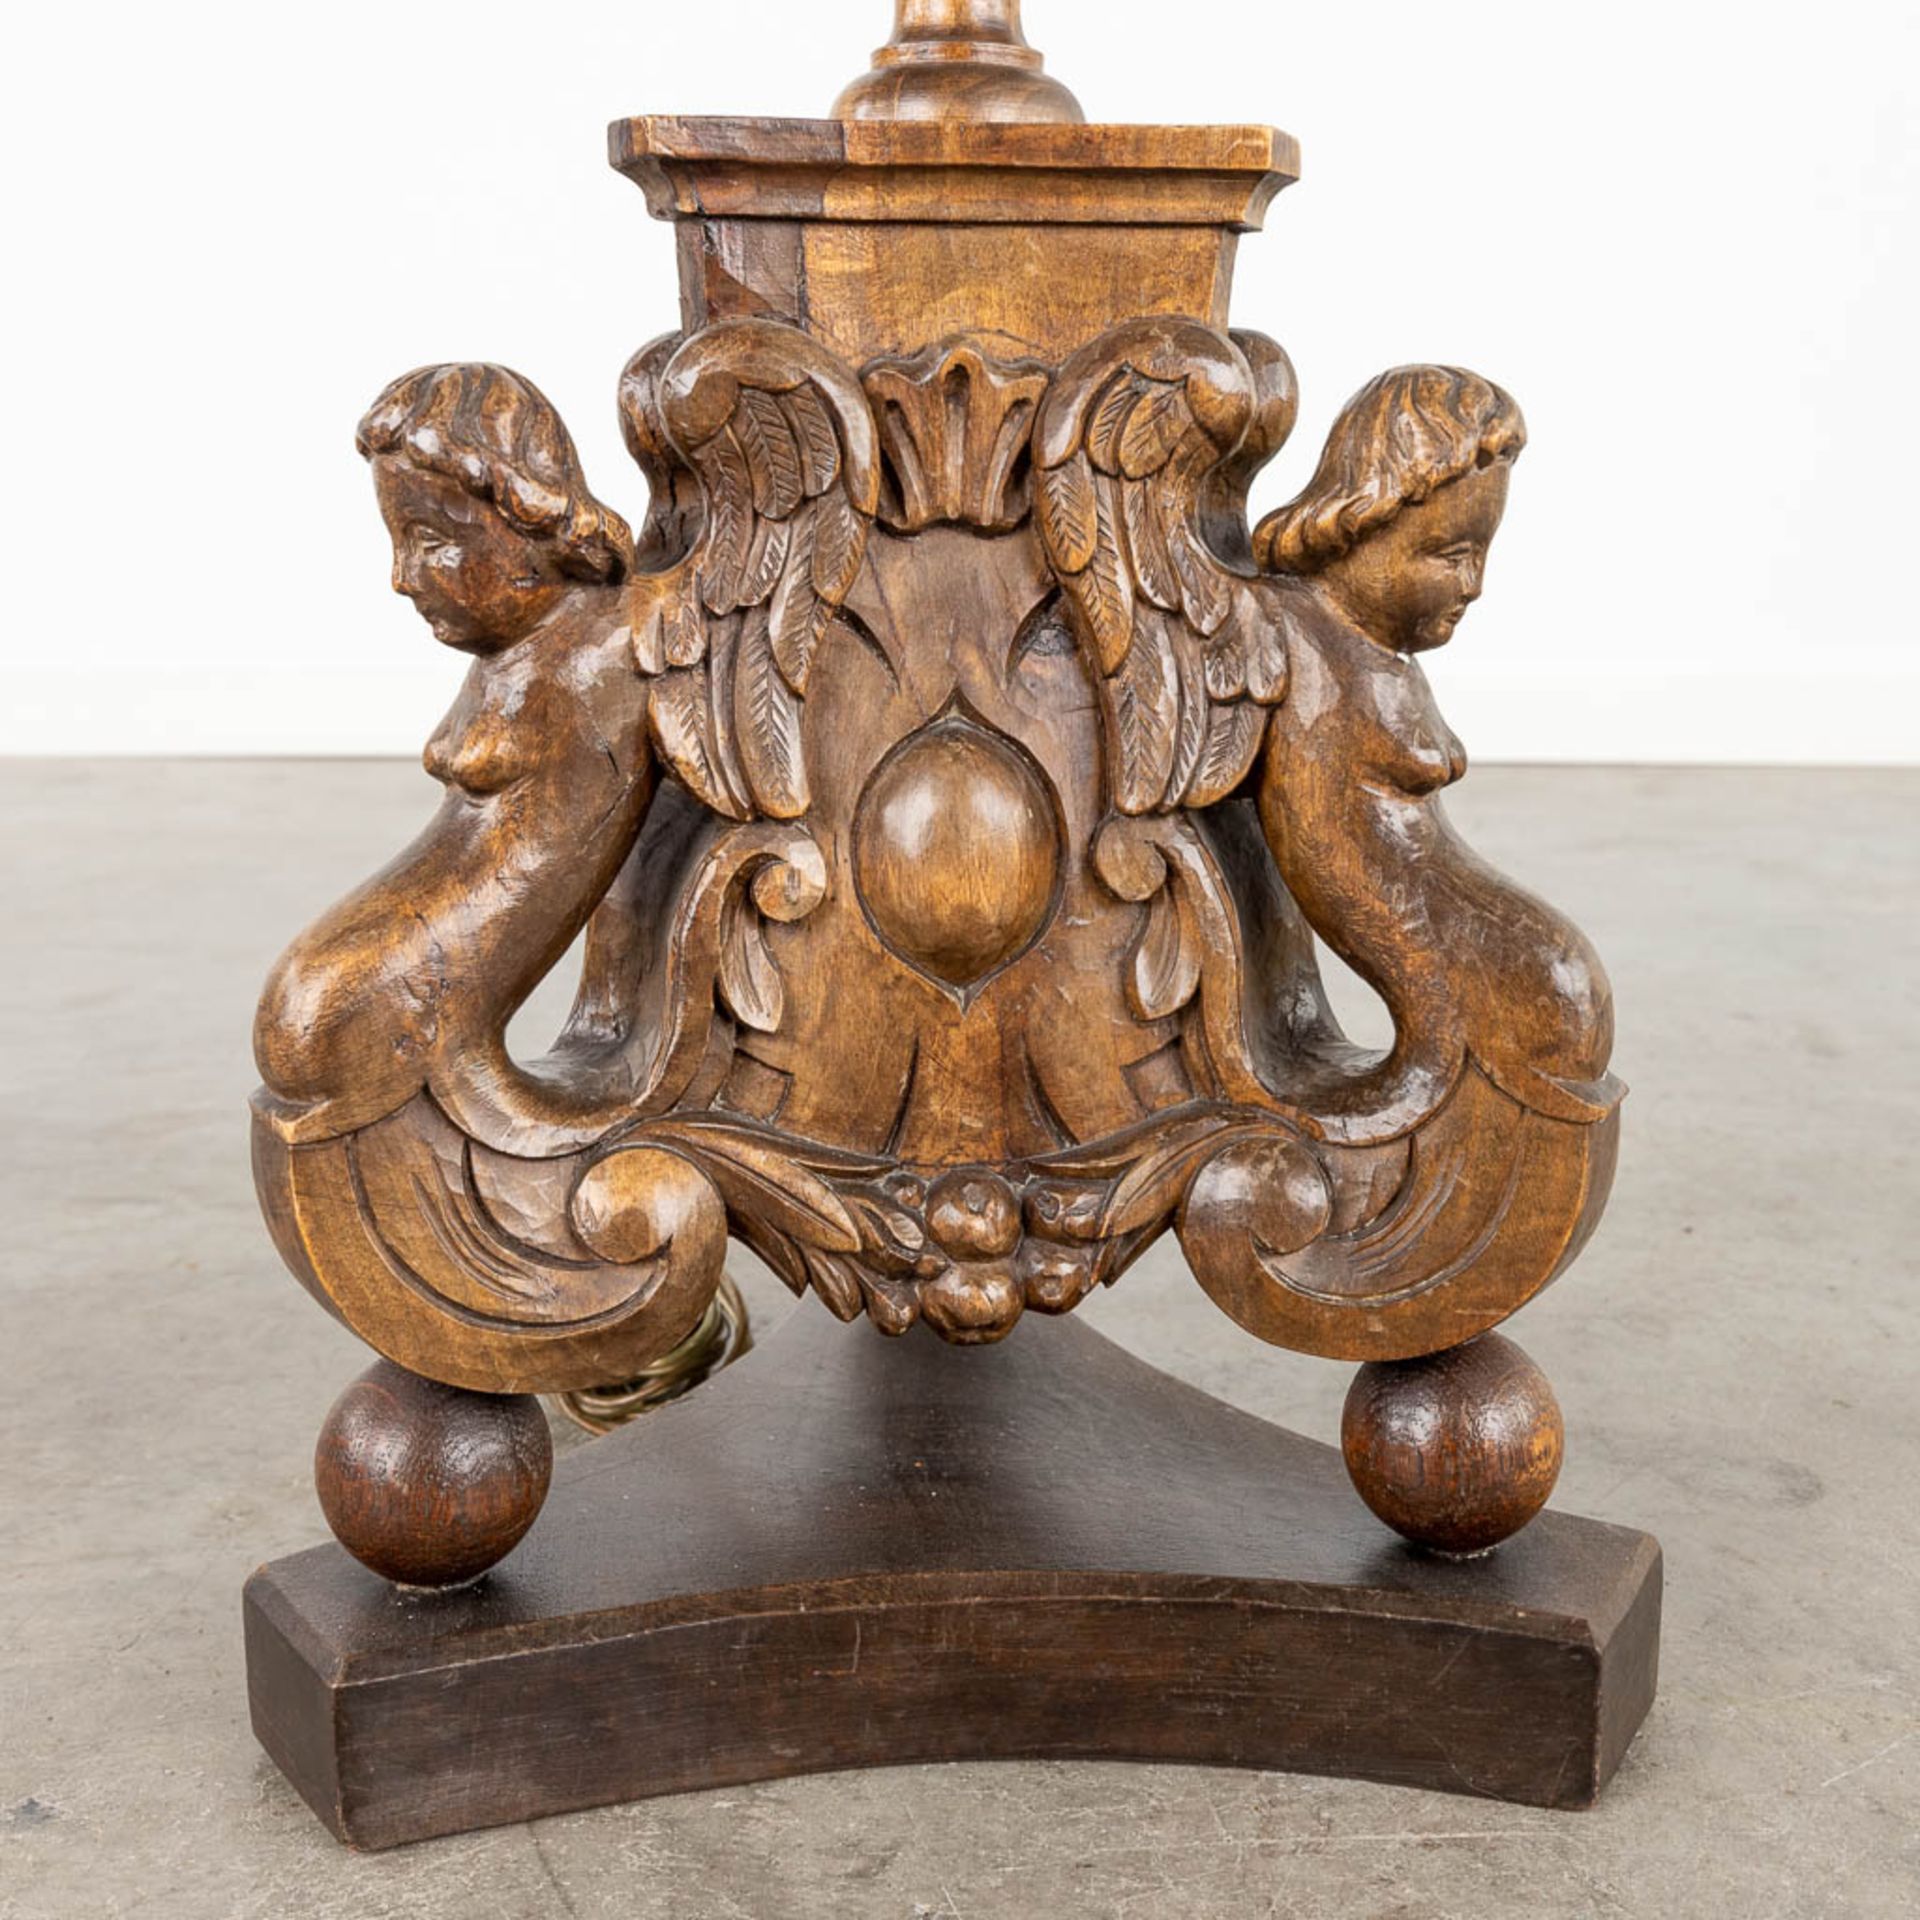 A wood-sculptured lamp base or candle holder, decorated with angels. (H:121 x D:23 cm) - Image 8 of 12